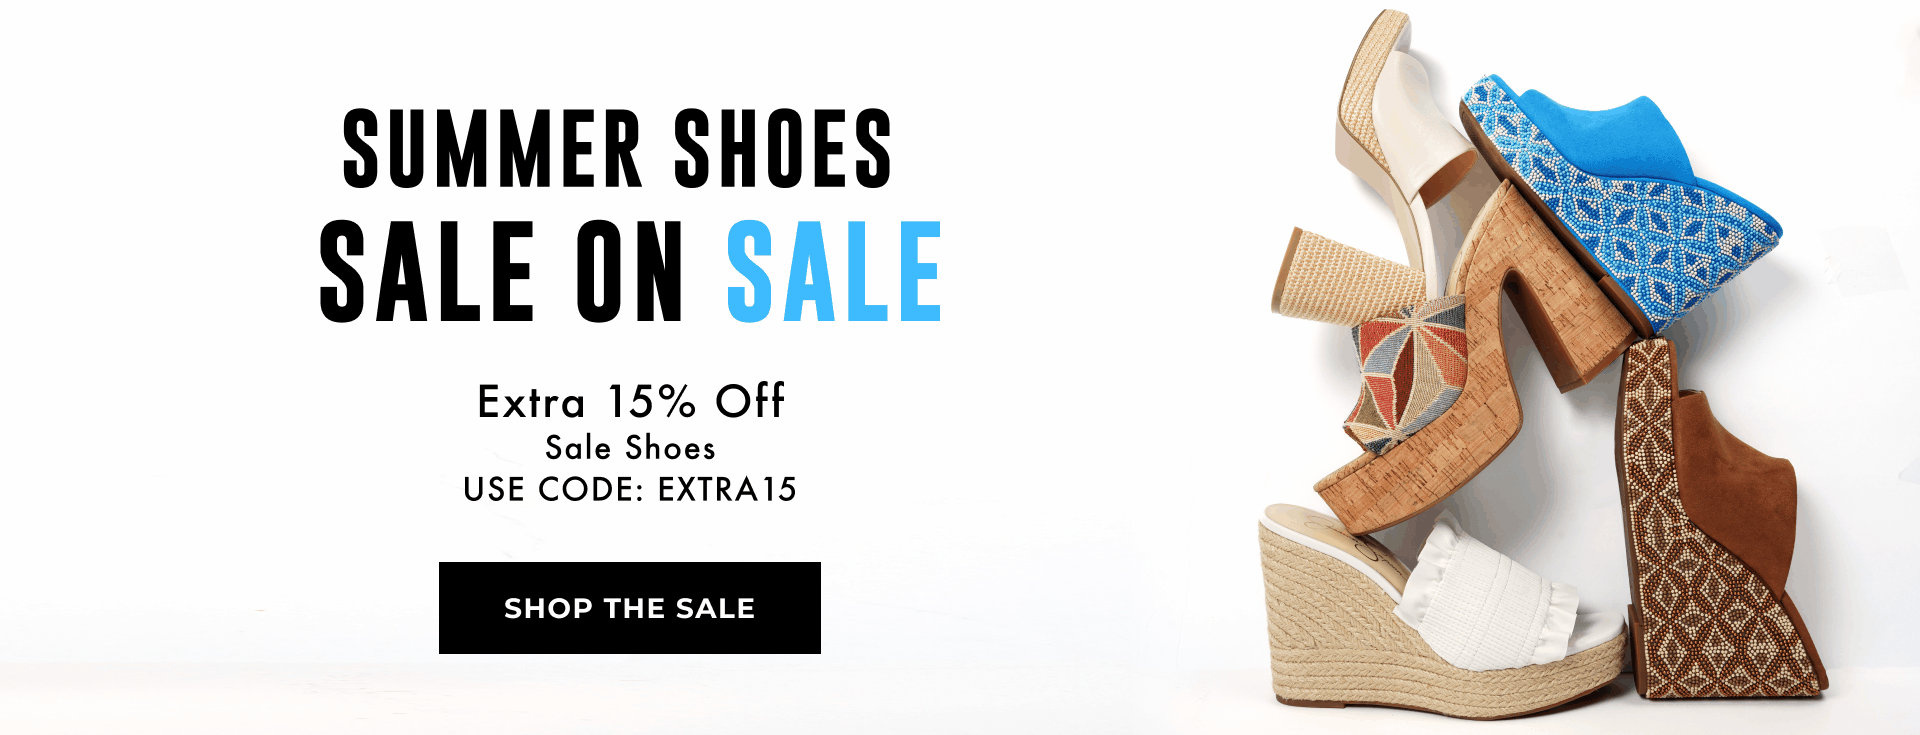 Summer Shoes Sale on Sale Extra 15% off sale shoes use code: EXTRA15